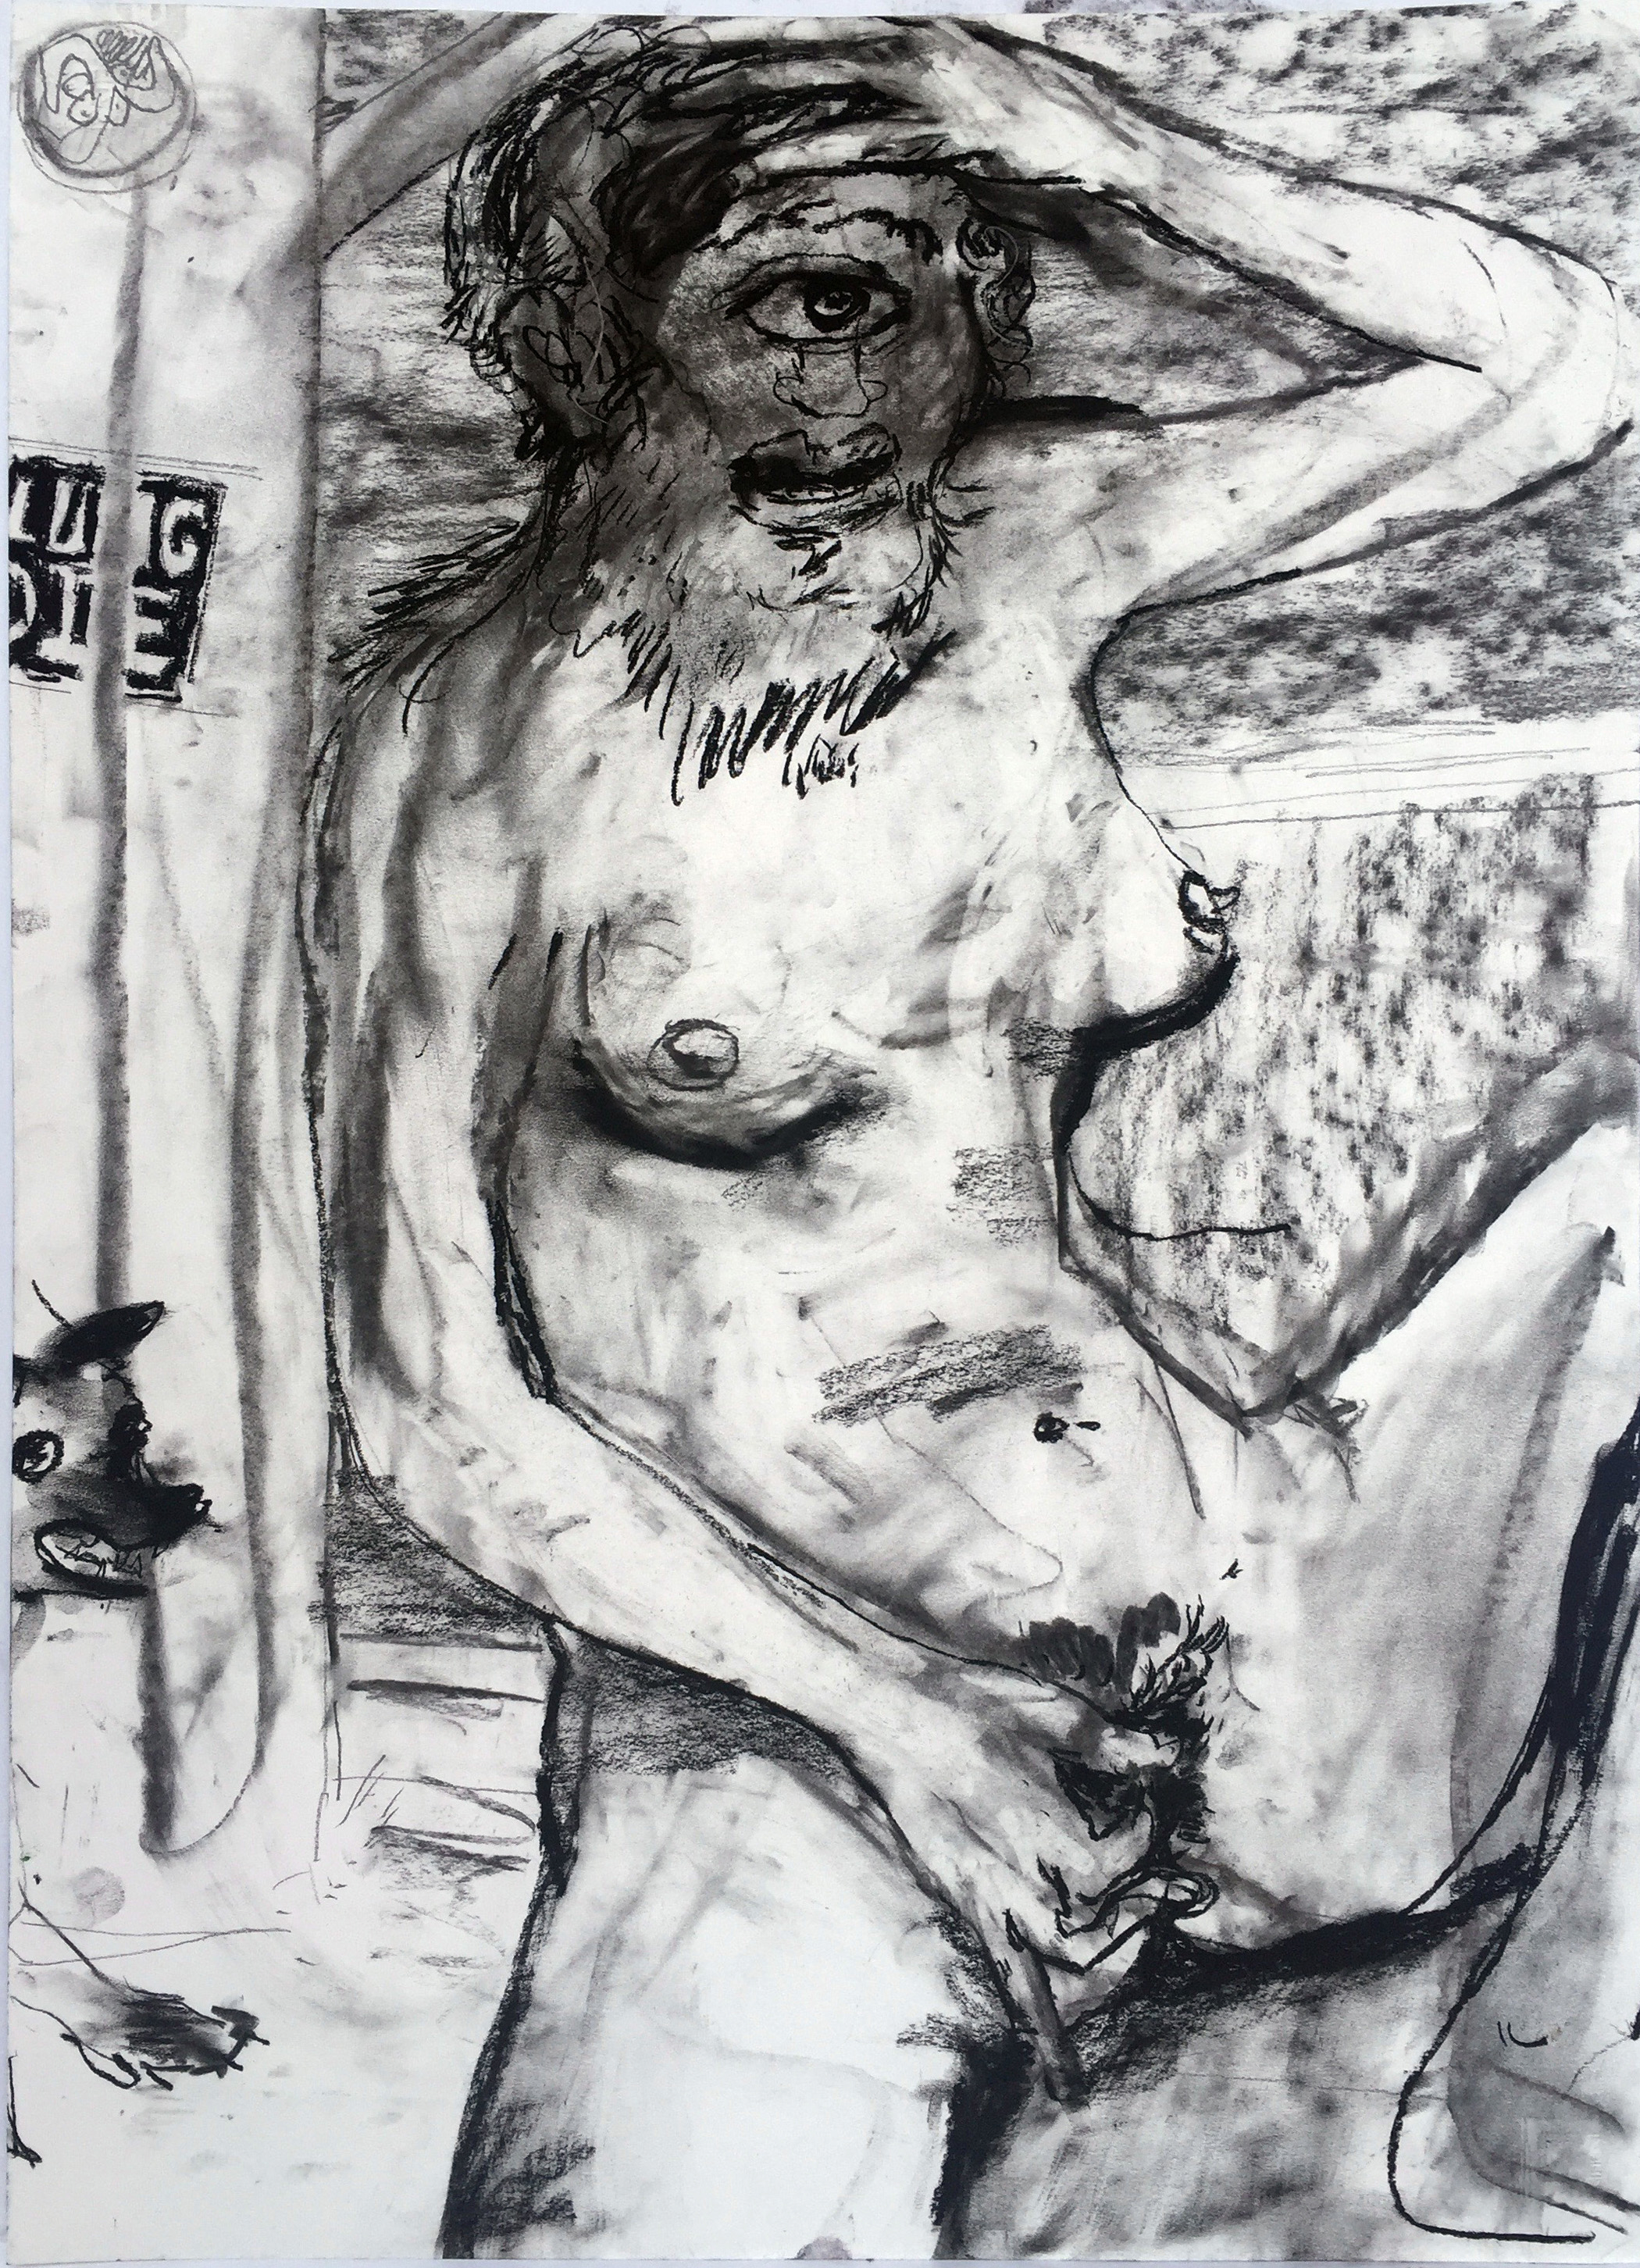 Cyclopes 18 by 24 inches charcoal on paper 2017.jpg